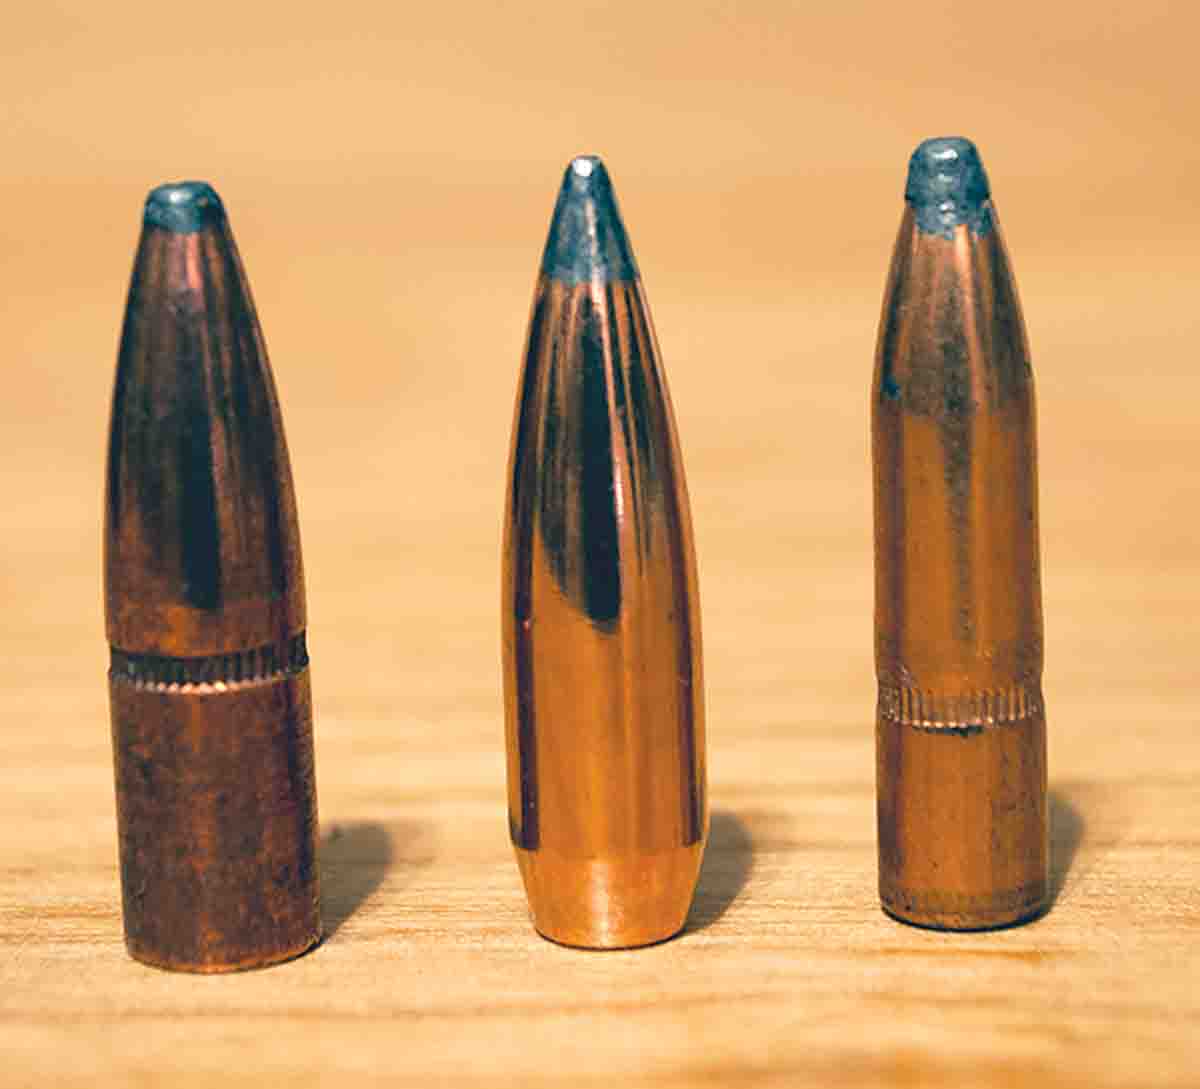 Traditional cup-and-core bullets should not be overlooked just because they’re not new. Left to right: Remington .30-caliber 180-grain Core-Lokt, Speer .30-caliber 165 BT SP and Winchester 6.5mm 140 Power-Point.